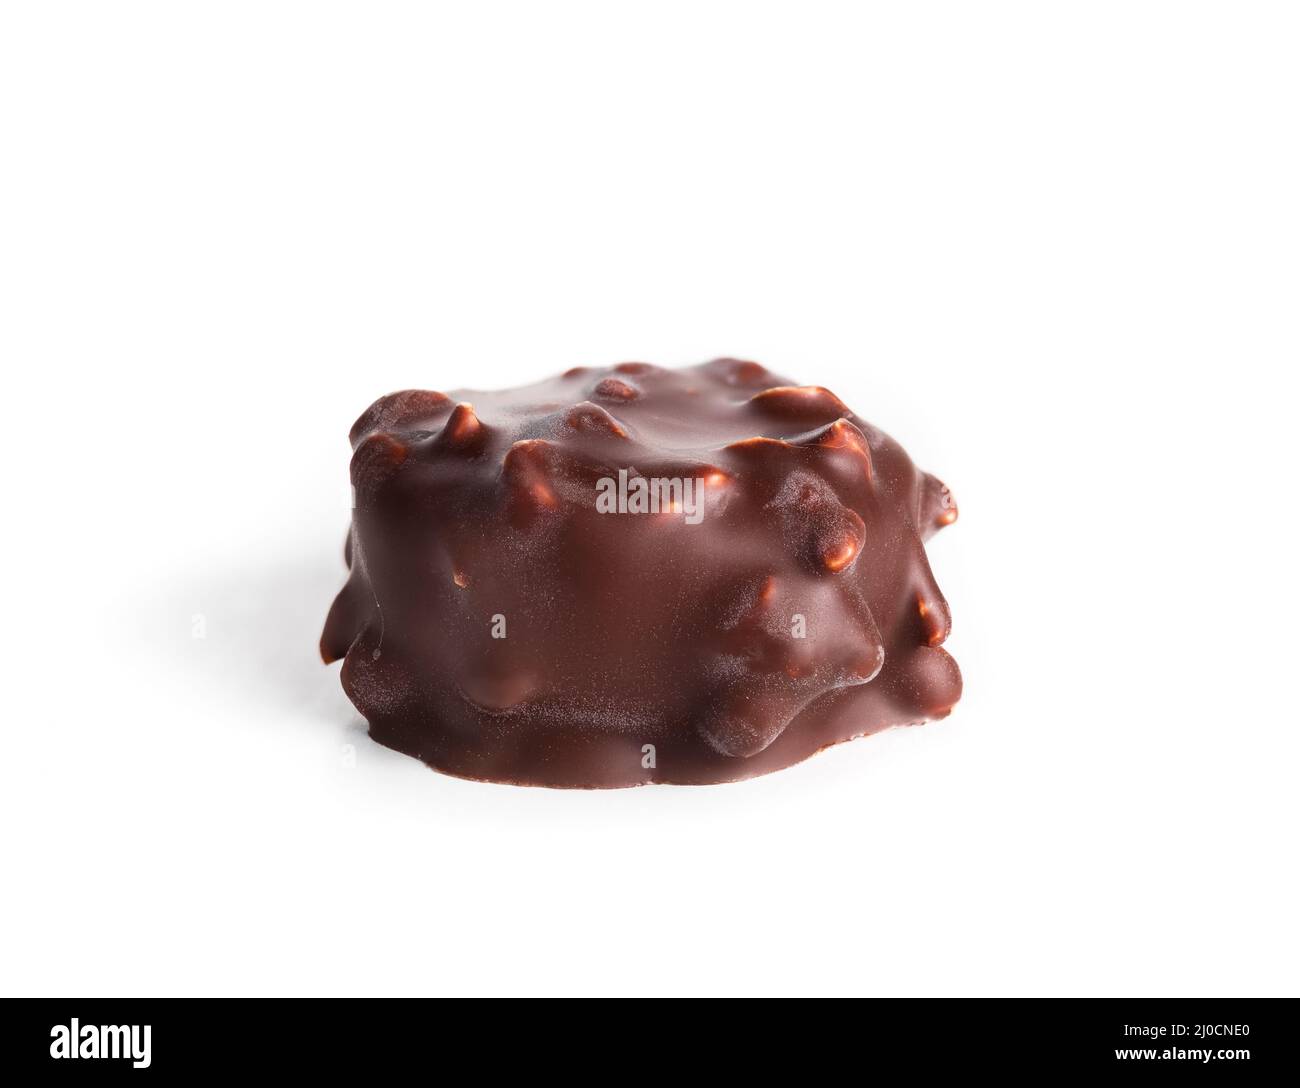 Isolated chocolate praline with hazelnut pieces. Closeup of one small non uniform chocolate truffle piece coated with dark chocolate. Selective focus. Stock Photo